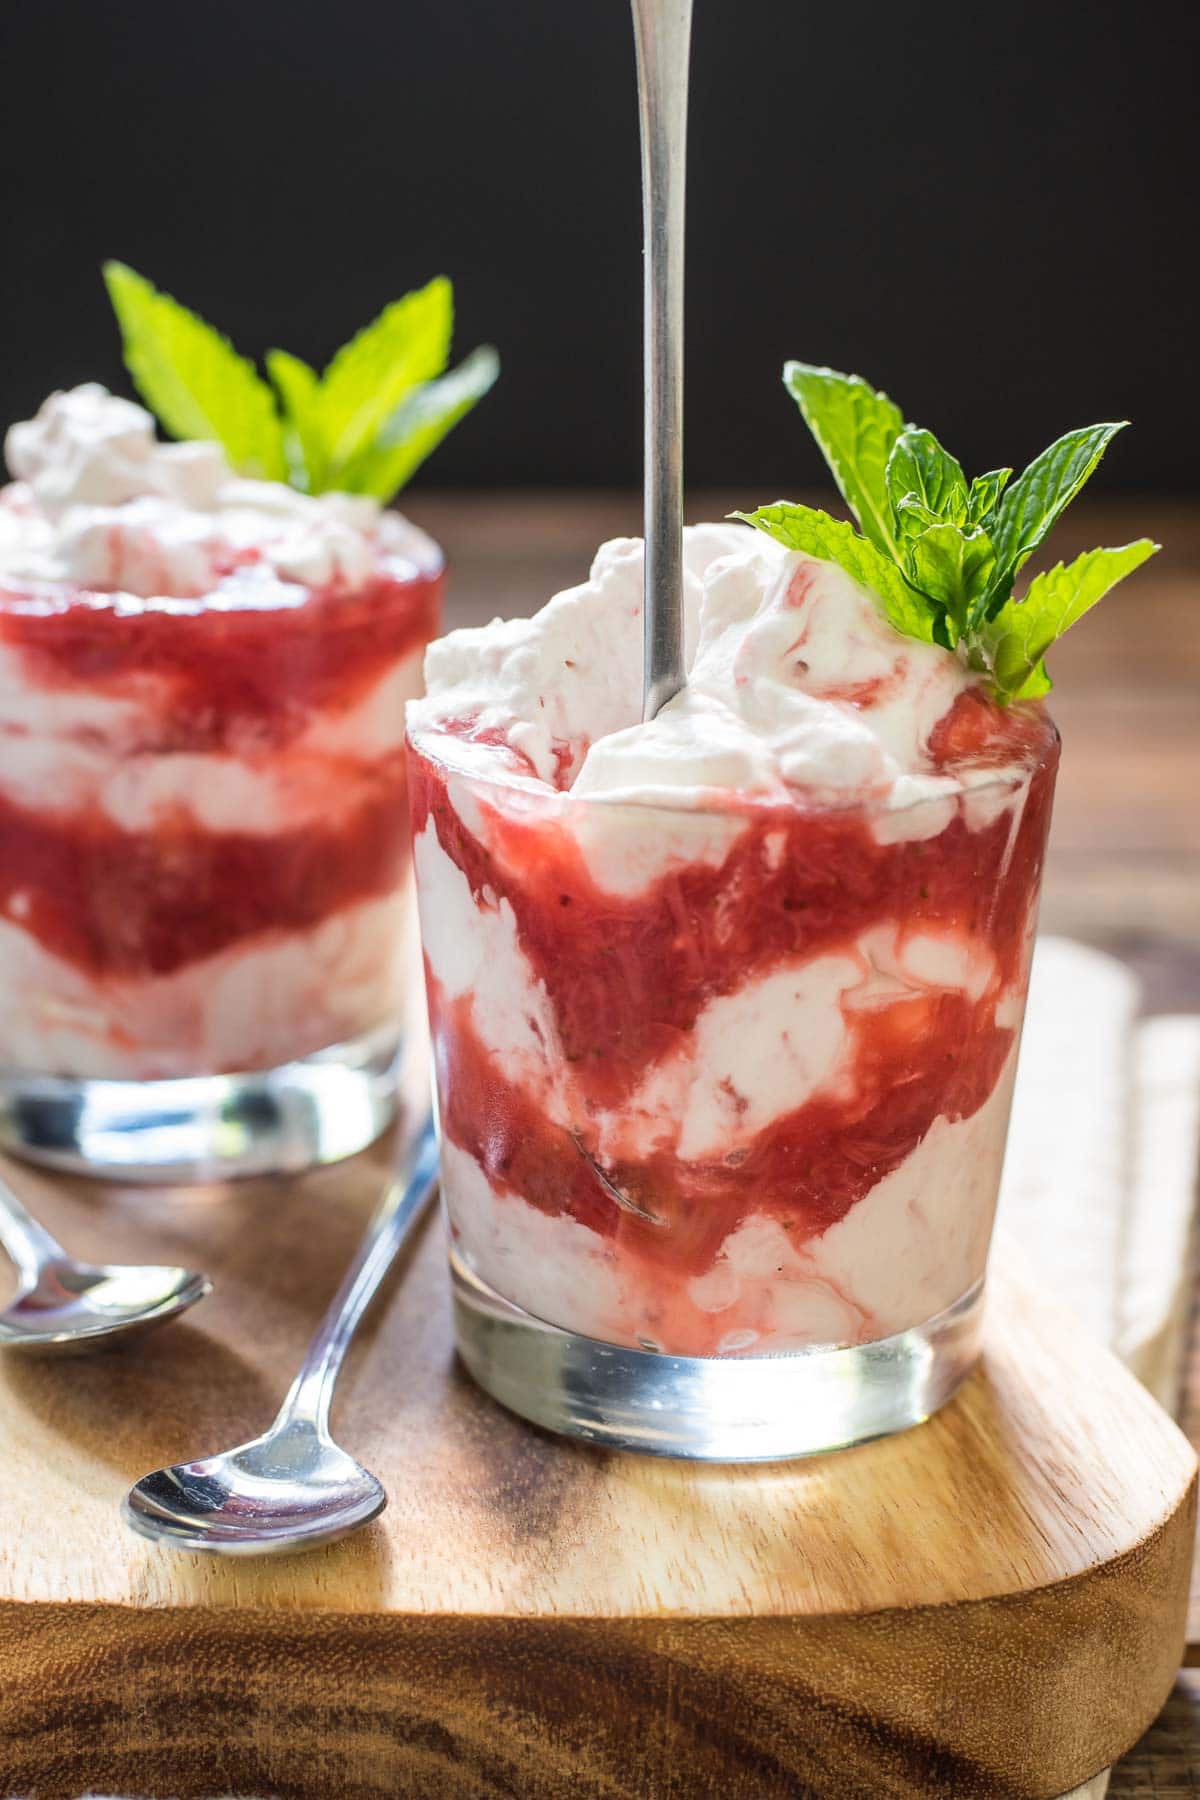 It doesn't get any easier or prettier than this Strawberry Rhubarb Fool! This no-bake dessert is light, airy, and the perfect sweet for summer!